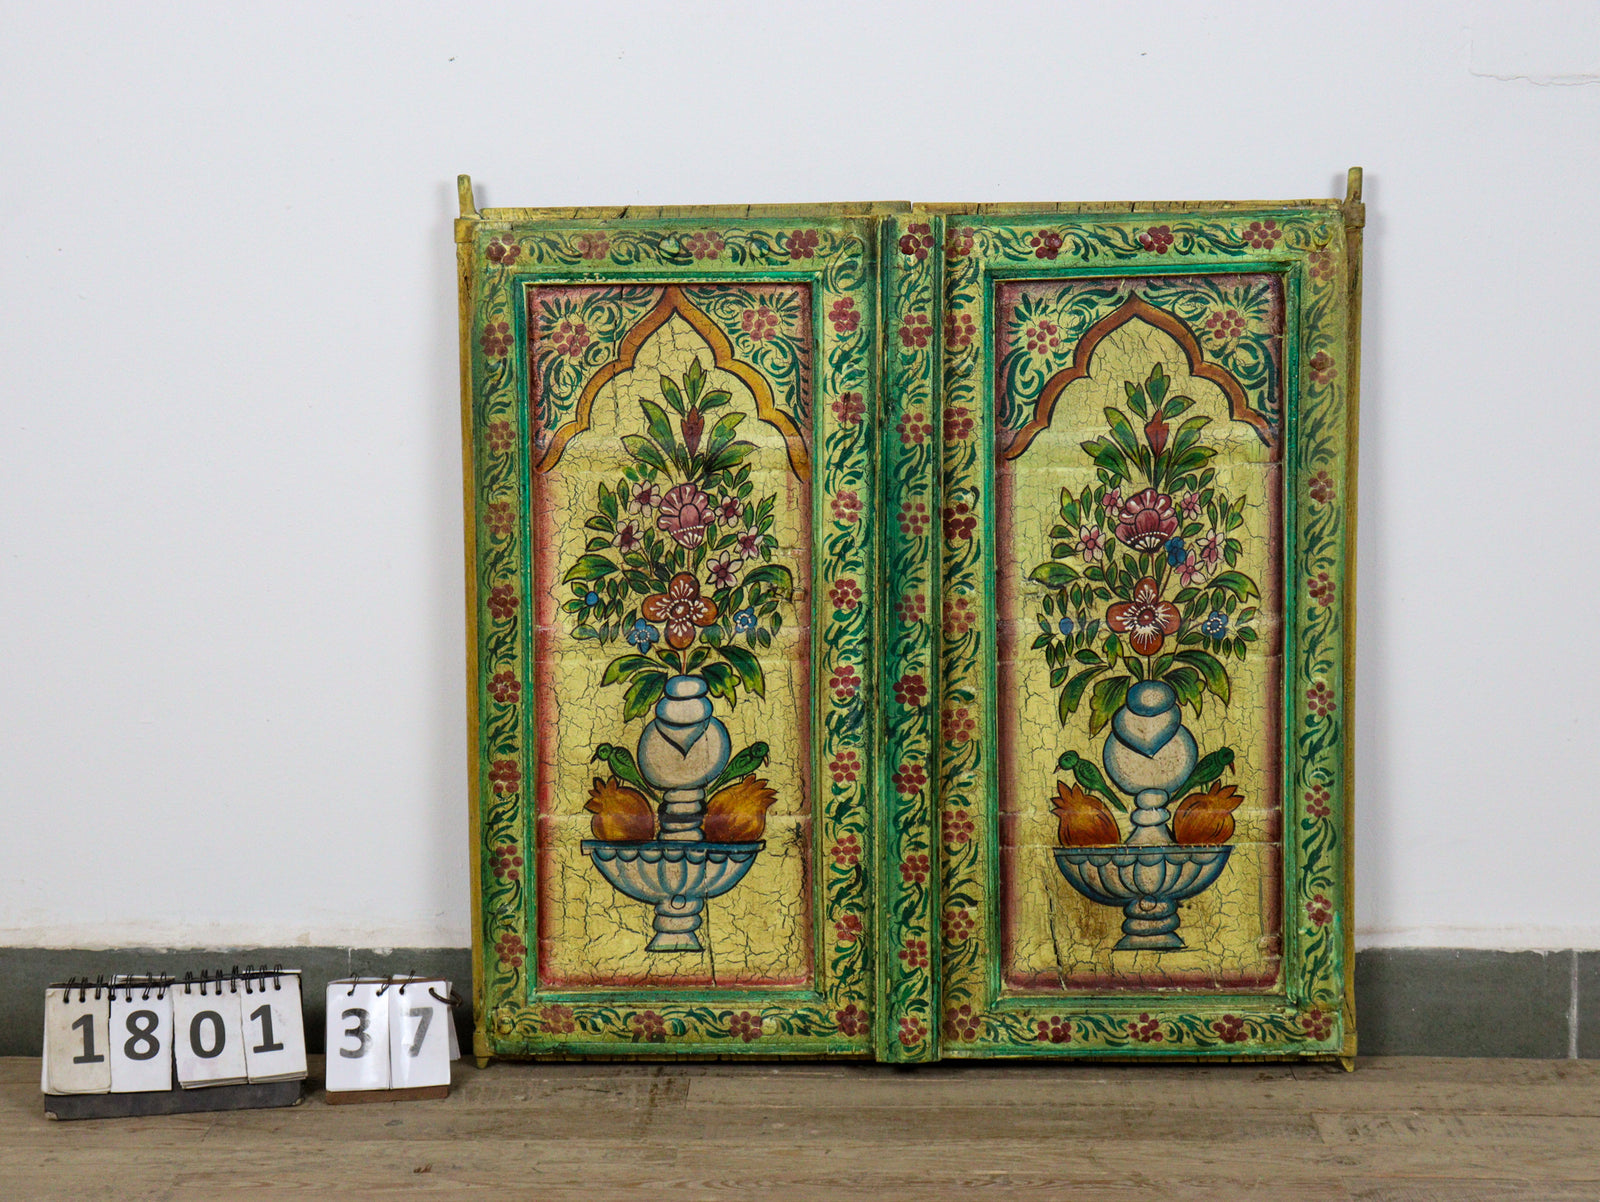 MILL-1801/37 Pair of Wooden Hand Painted Shutters C27